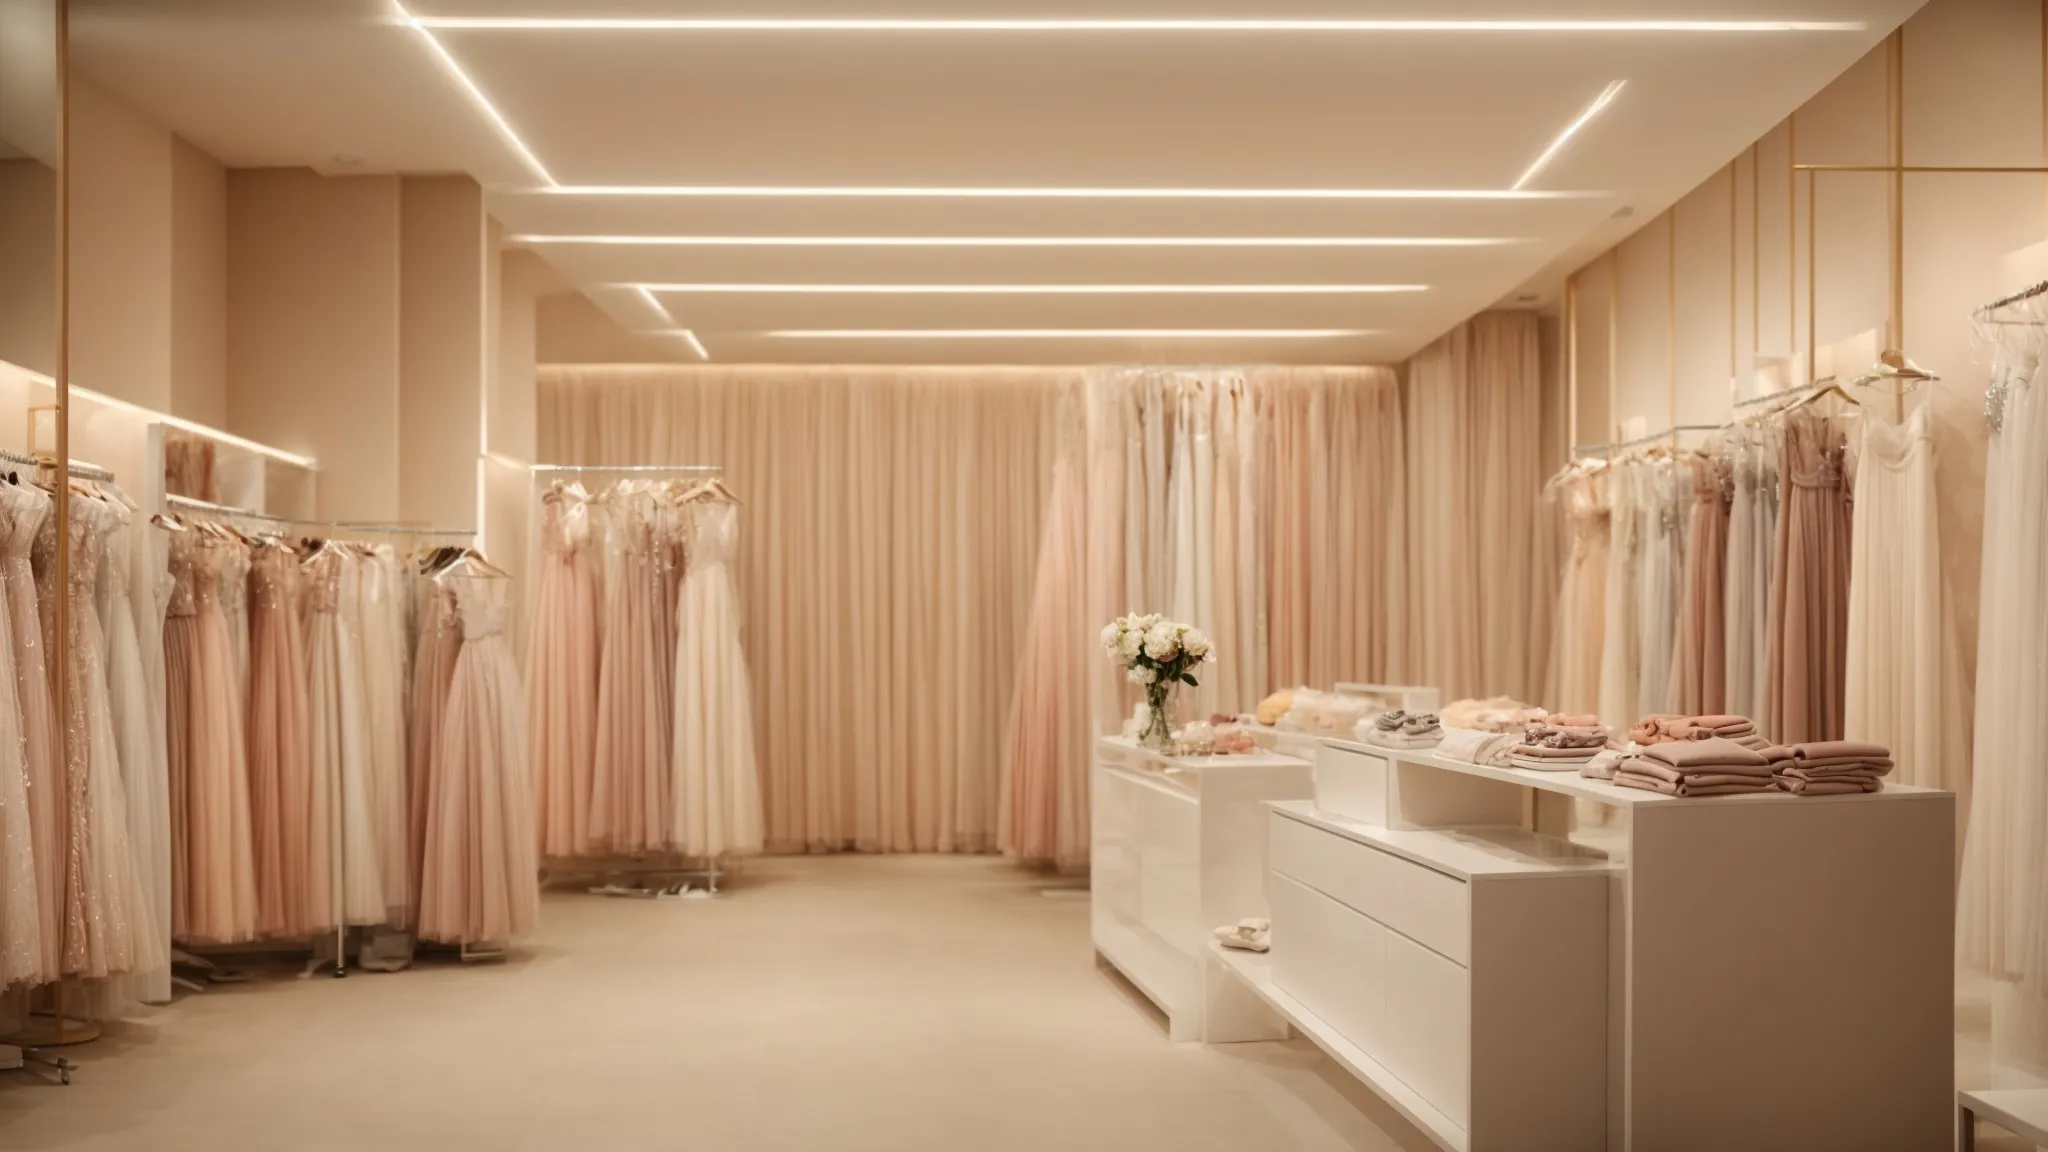 a lavish fashion boutique, bathed in soft lighting, showcases elegant dresses on minimalist stands against a backdrop of neutral colors.